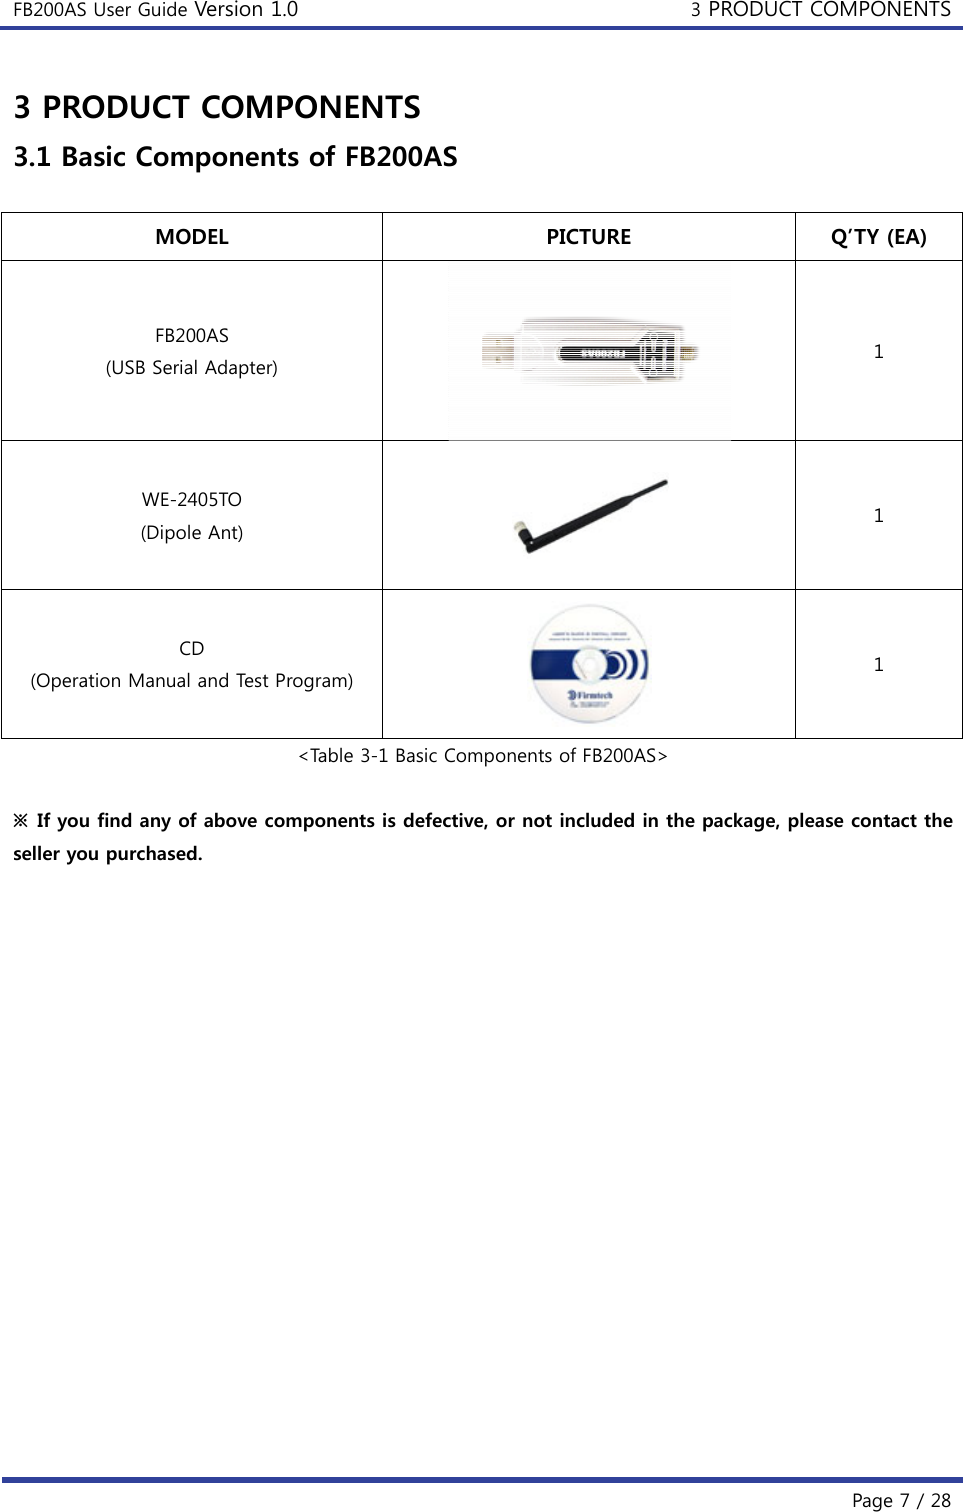 FB200AS User Guide Version 1.0 3 PRODUCT COMPONENTS  Page 7 / 28 3 PRODUCT COMPONENTS 3.1 Basic Components of FB200AS  MODEL  PICTURE  Q’TY (EA) FB200AS (USB Serial Adapter)  1 WE-2405TO (Dipole Ant)  1 CD (Operation Manual and Test Program)  1 &lt;Table 3-1 Basic Components of FB200AS&gt;  ※ If you find any of above components is defective, or not included in the package, please contact the seller you purchased.   